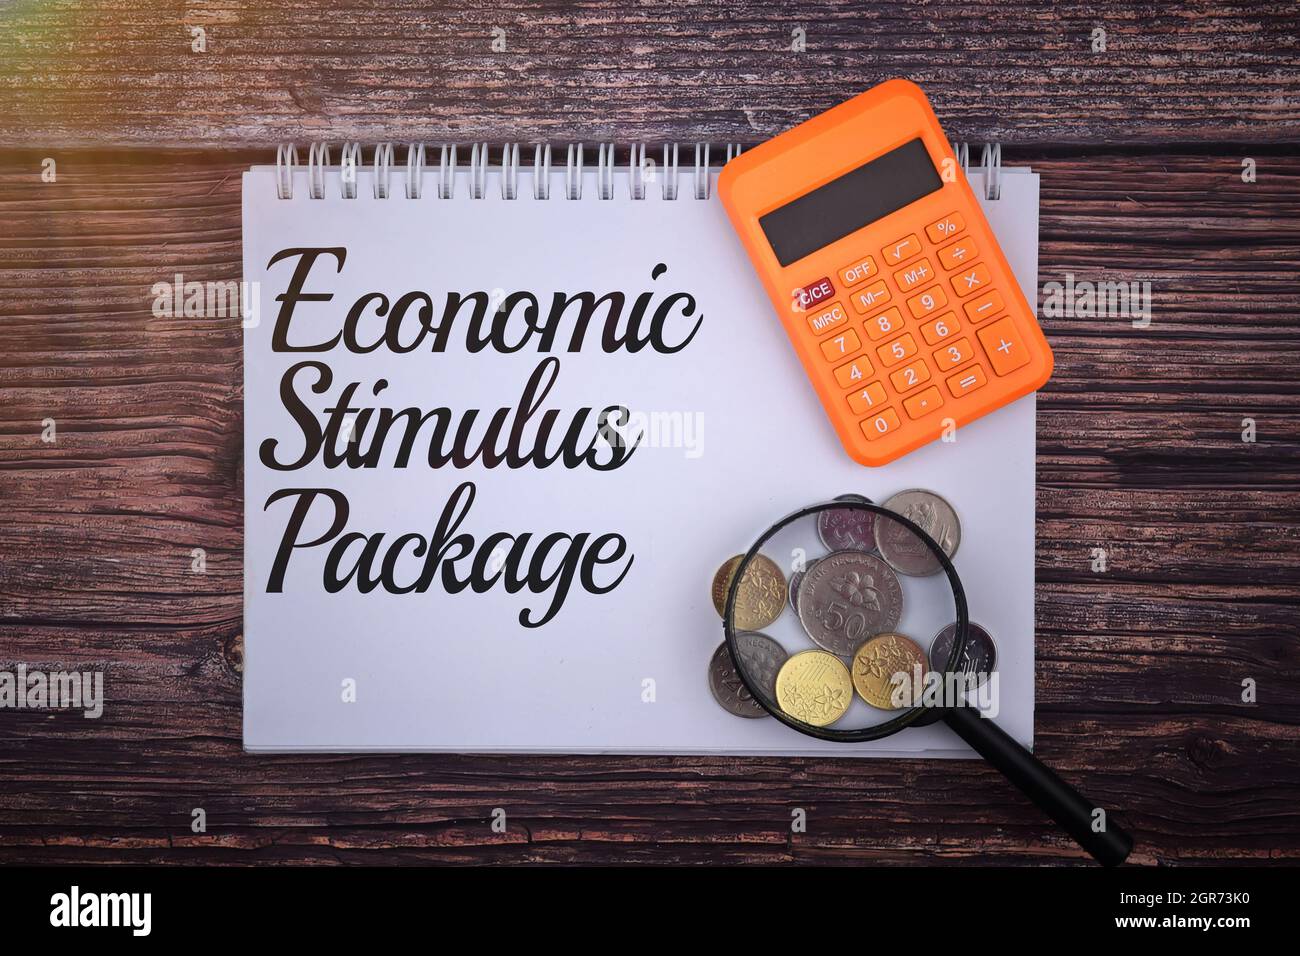 Economic Stimulus Package Wording On A Wooden Background. Business And Economy Concept Stock Photo